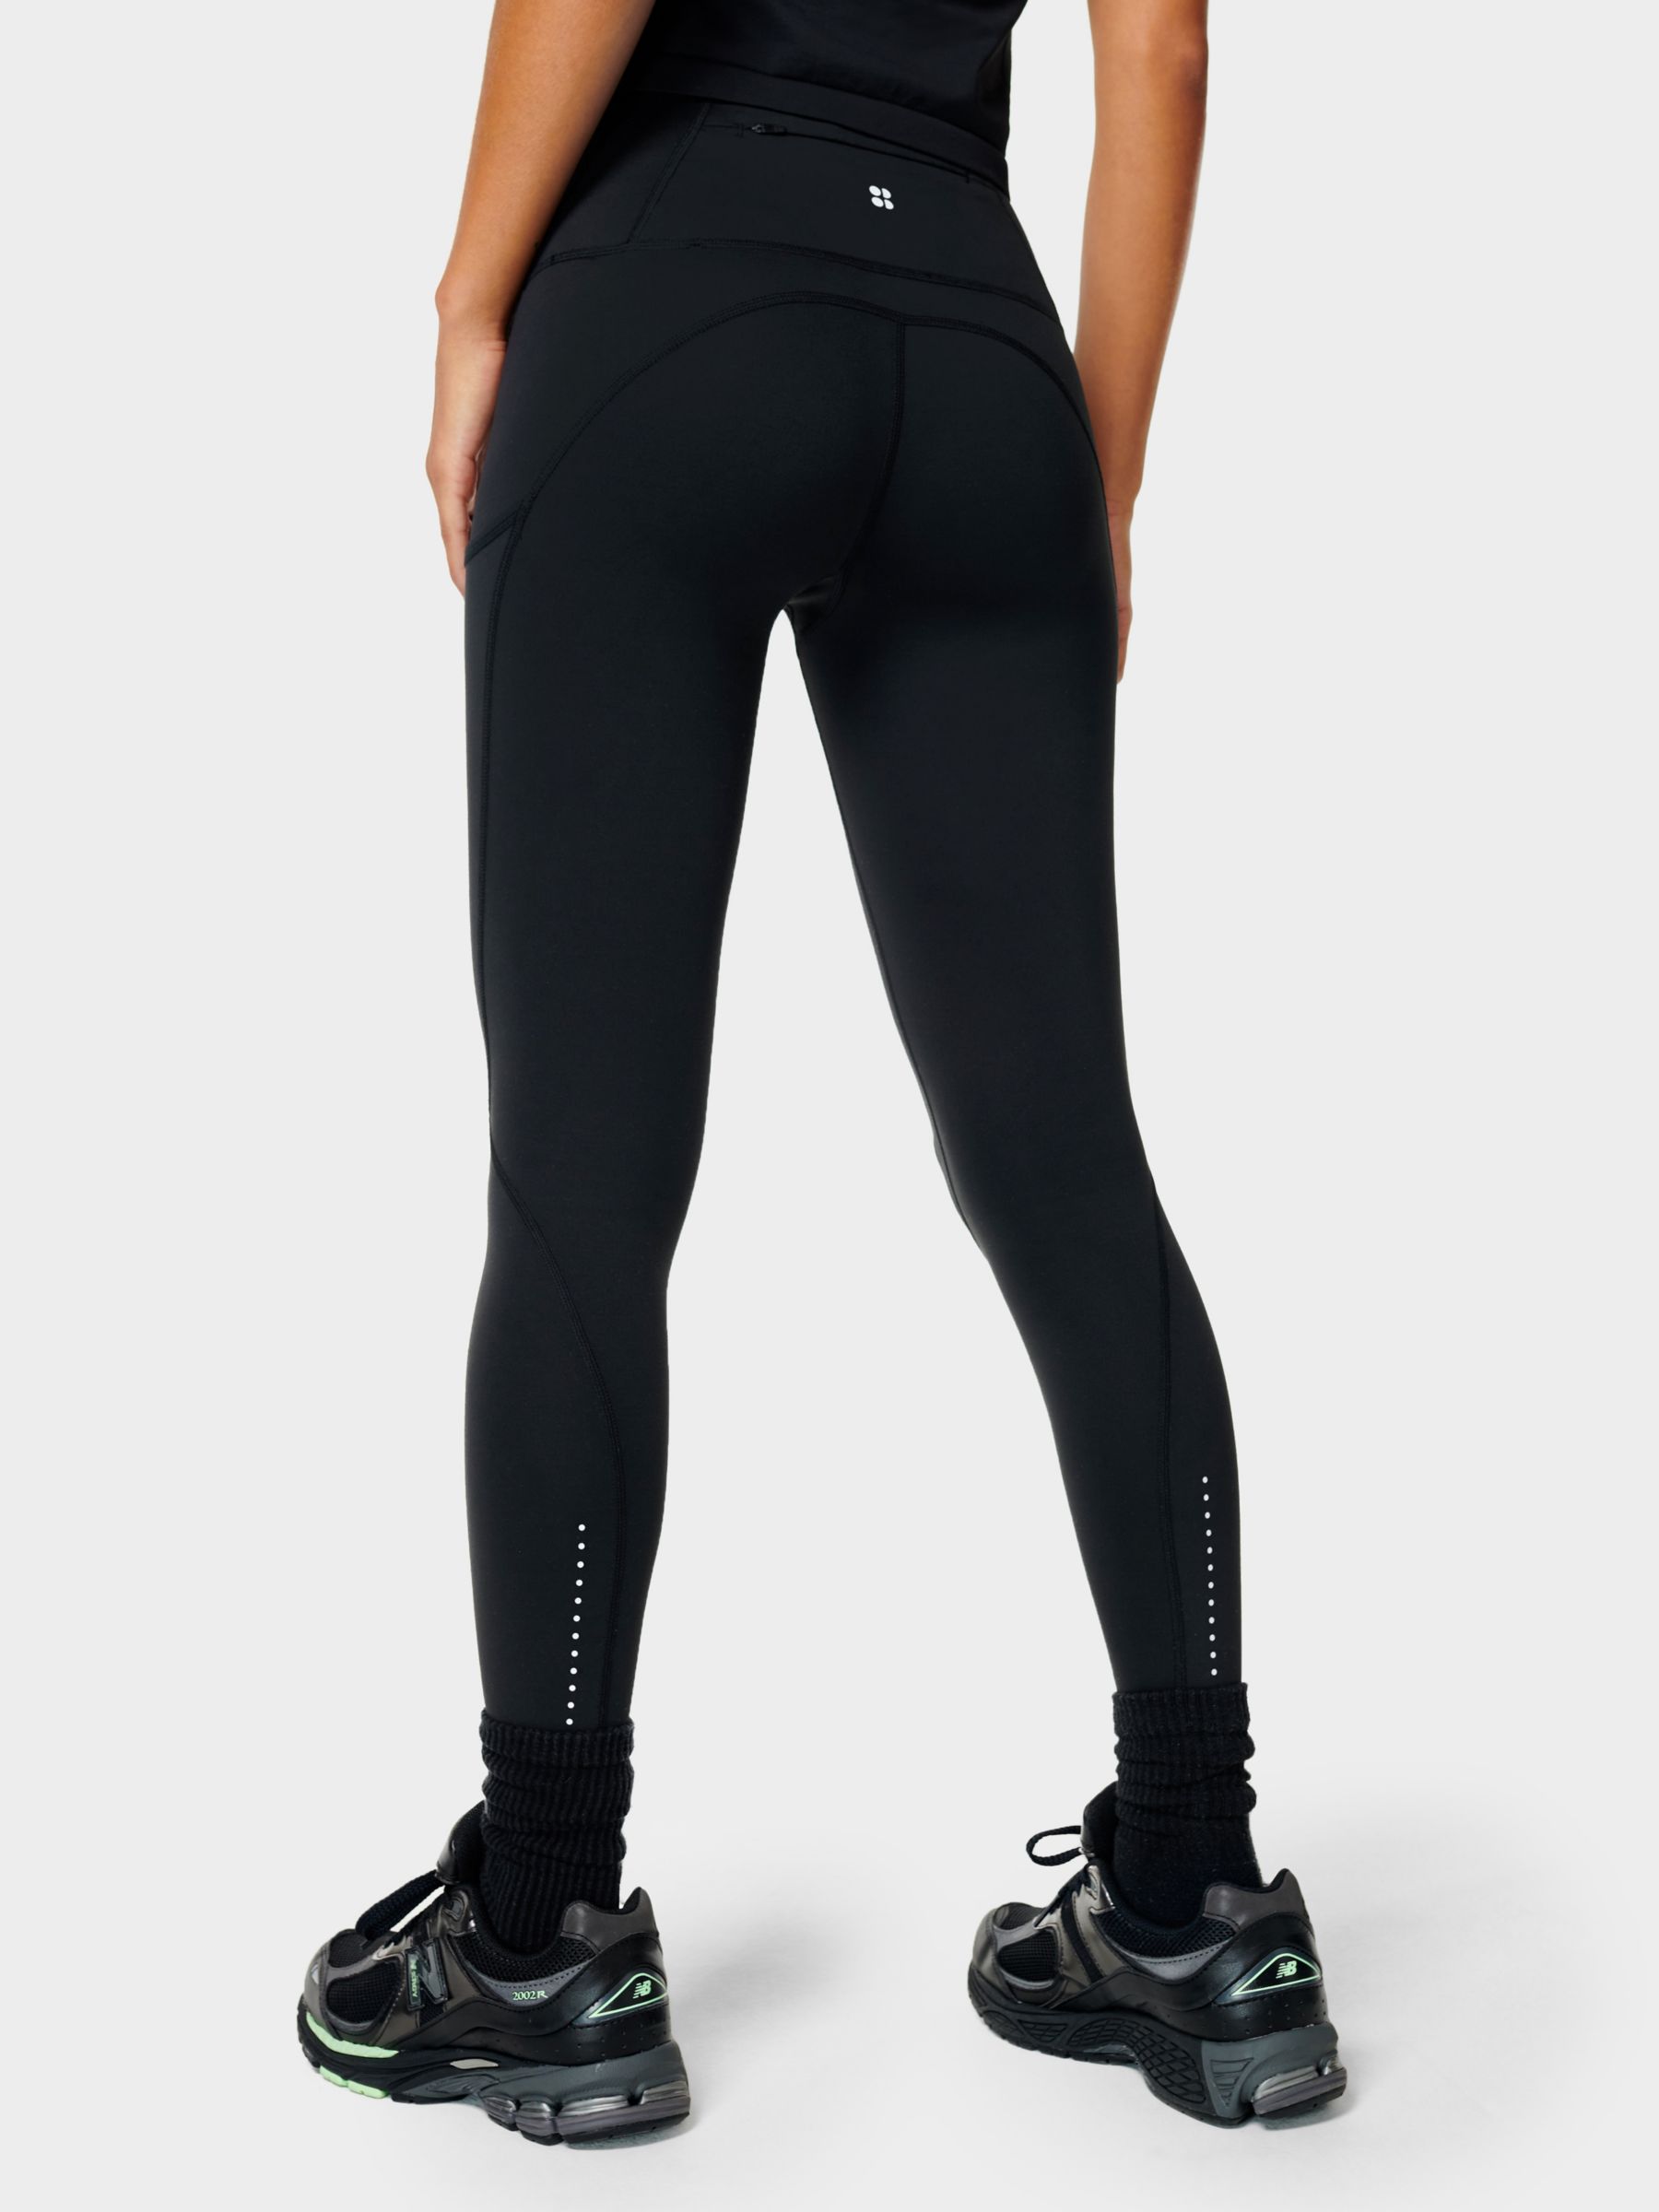 SWEATY BETTY Therma Boost Stretch Running Leggings in HOURBLUE